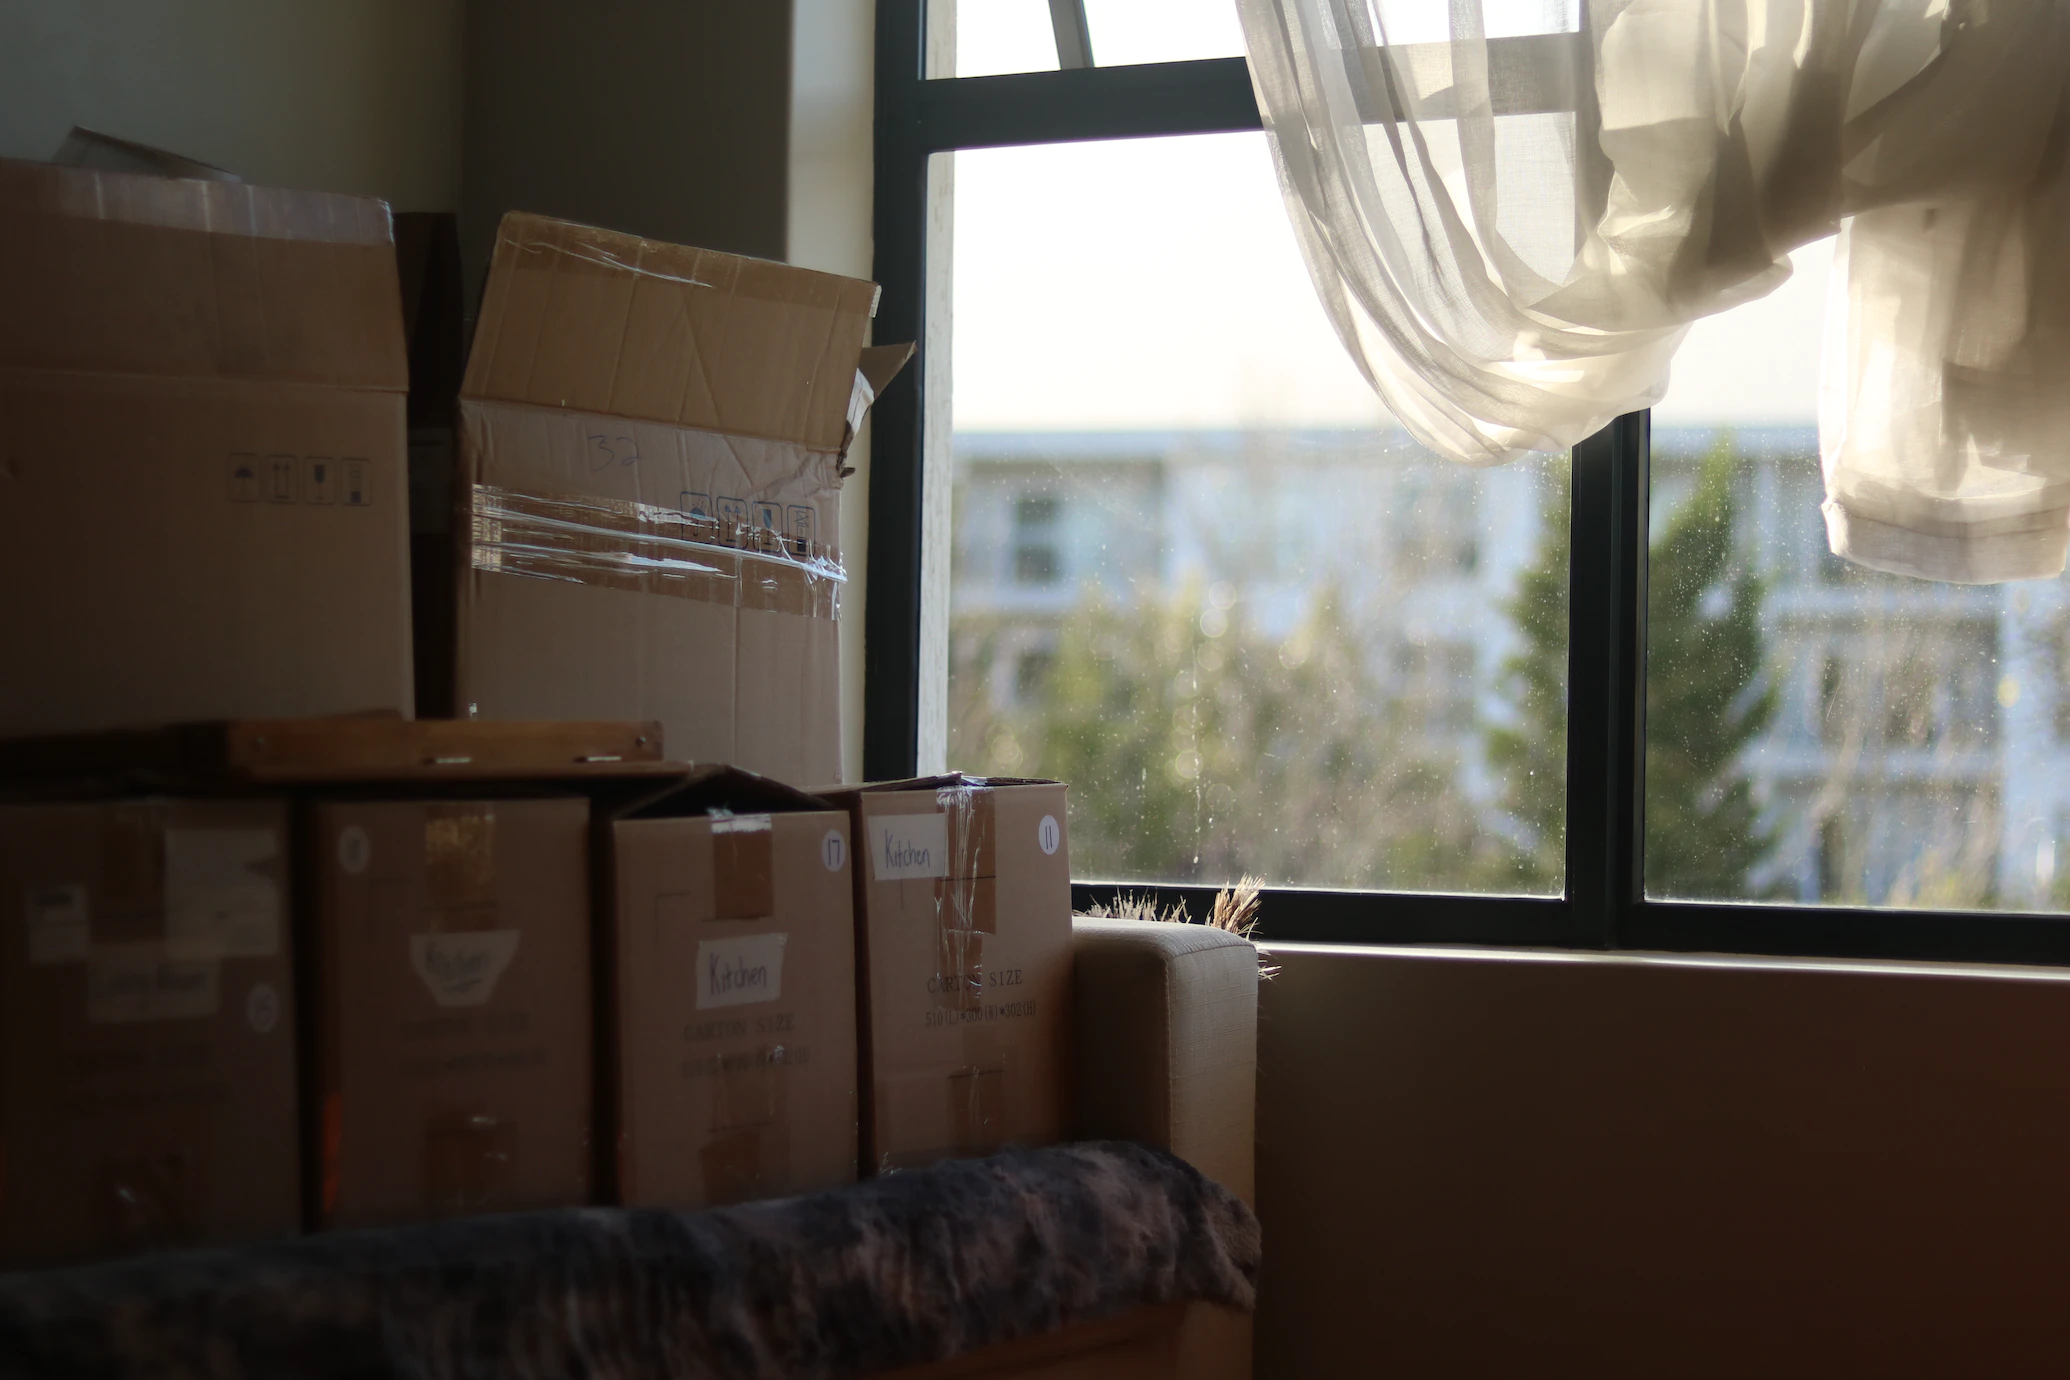 5 Ways to Save Money While Moving